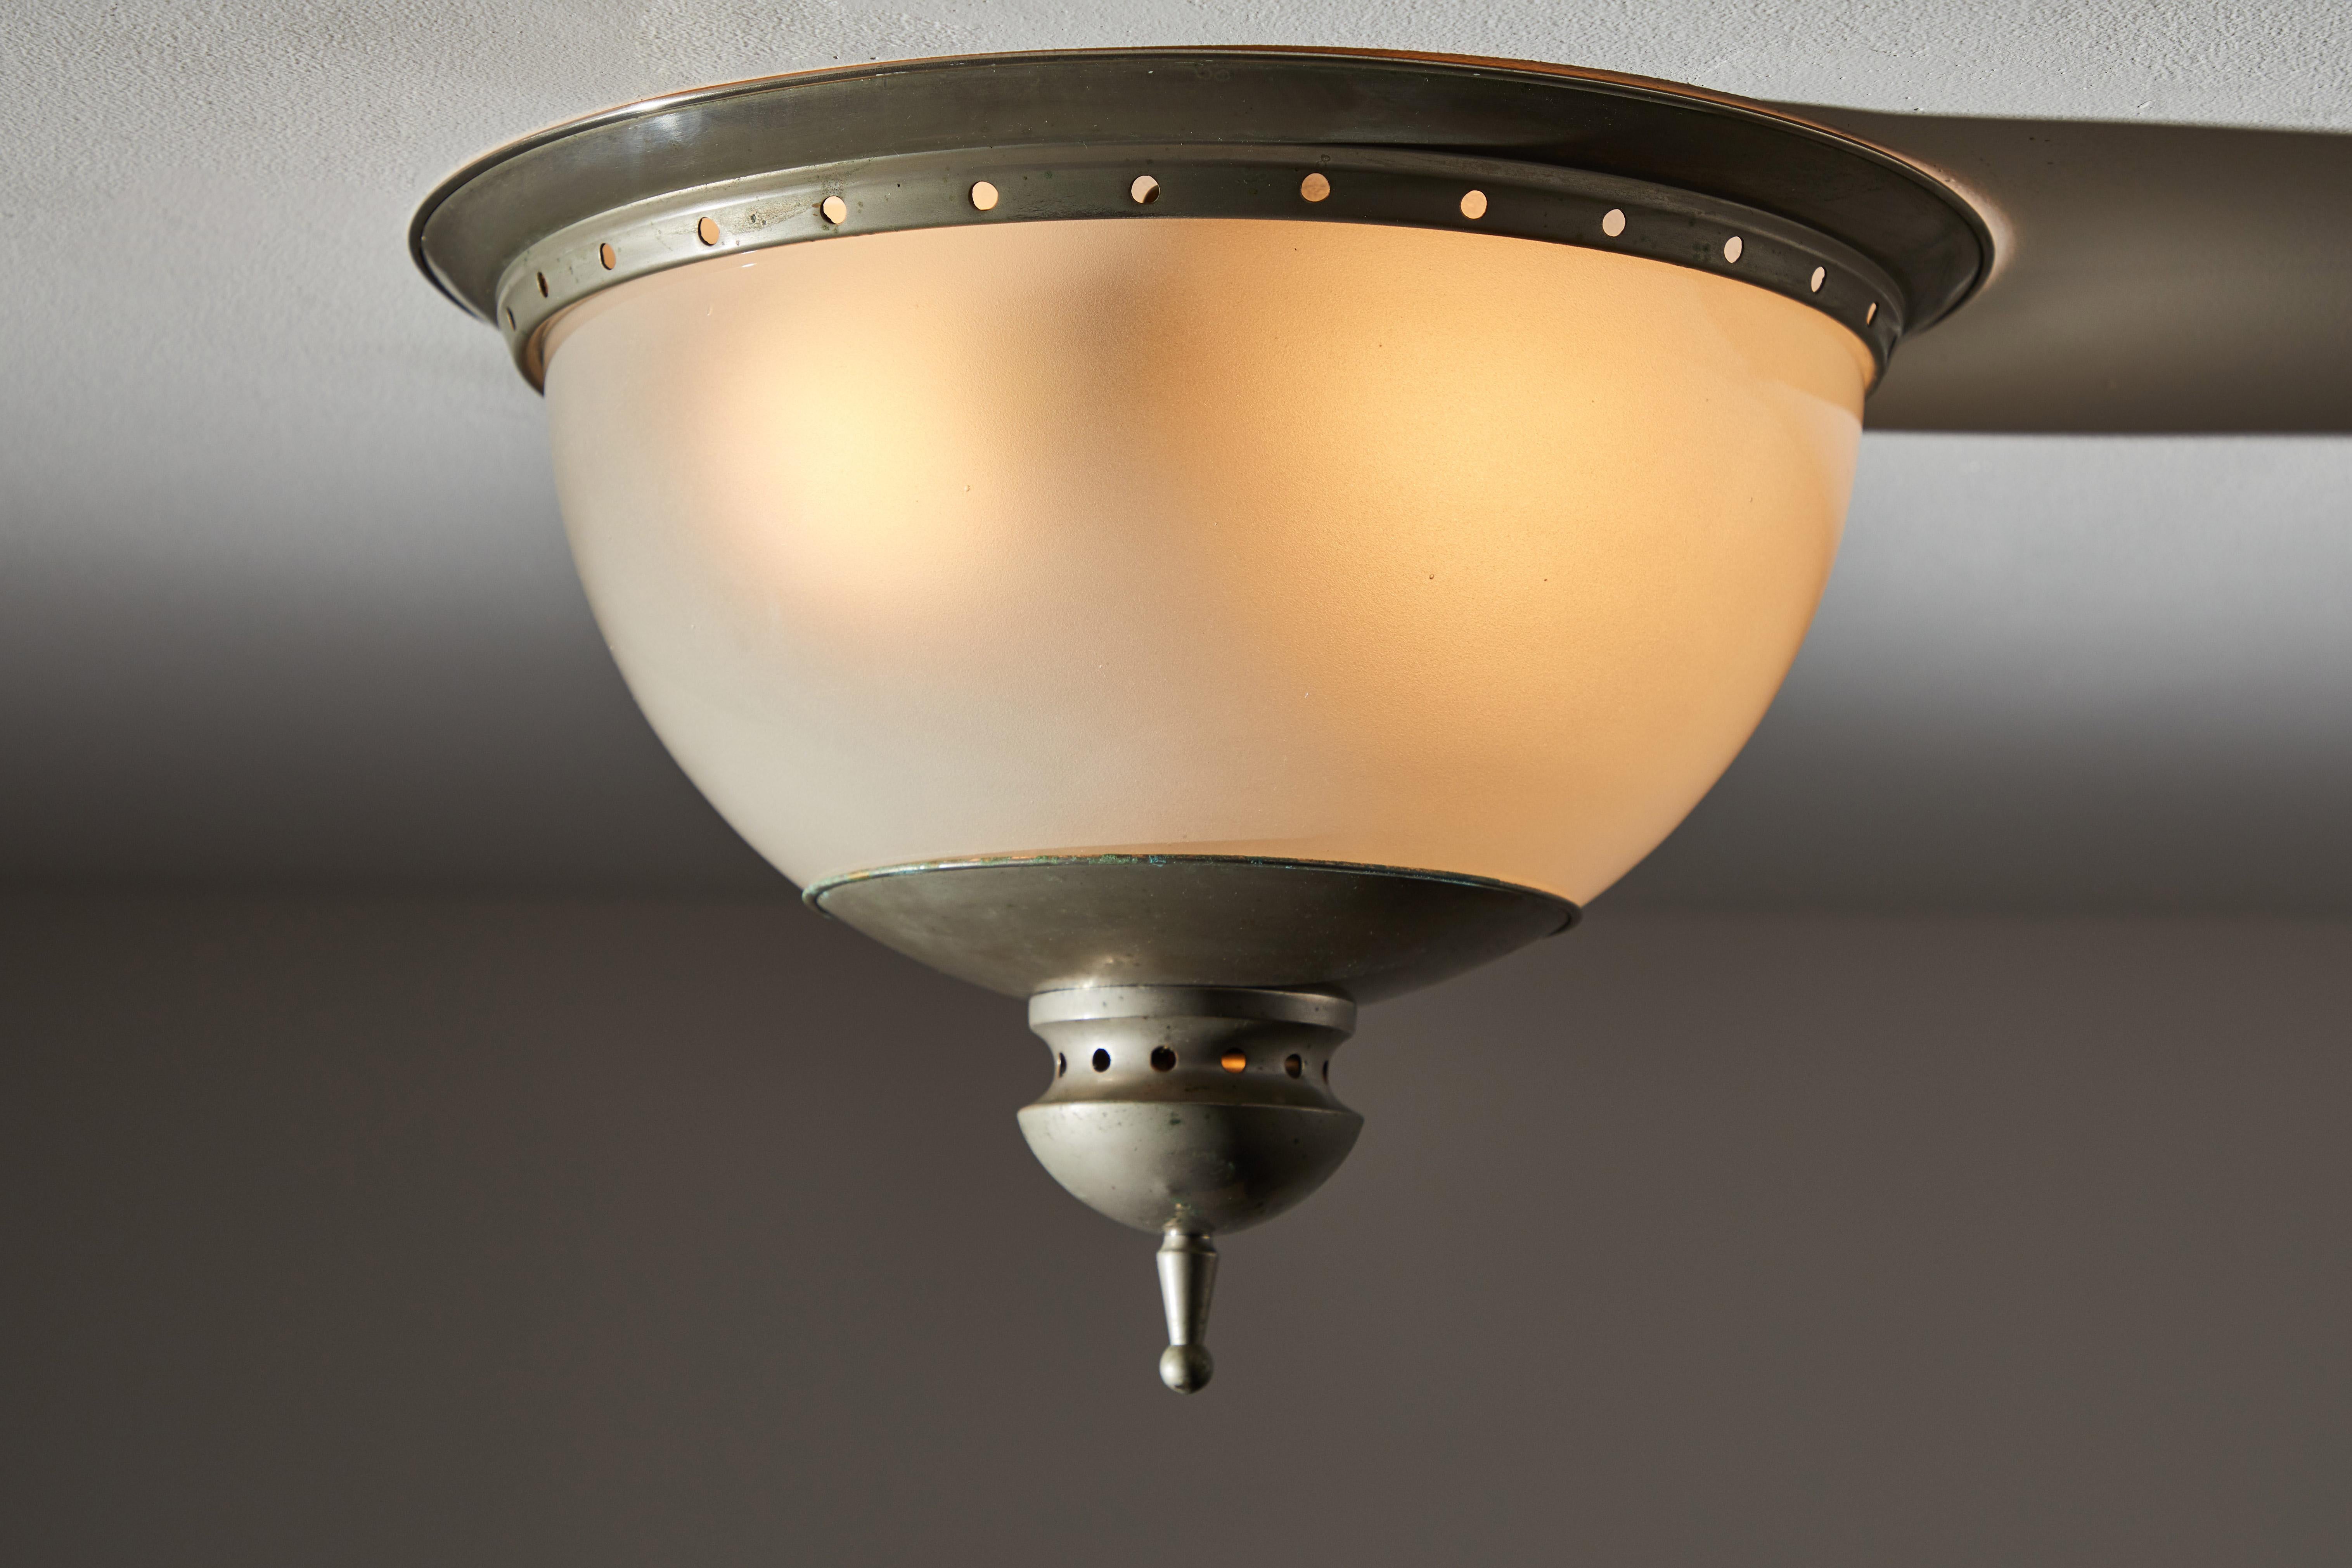 Flush mount ceiling light in the style of Caccia Dominioni for Azucena. Designed and manufactured in Italy, circa 1950s. Pewter plated brass, opaline glass. Rewired for U.S. Junction boxes. Takes two E27 75w maximum bulbs. Bulbs provided as a